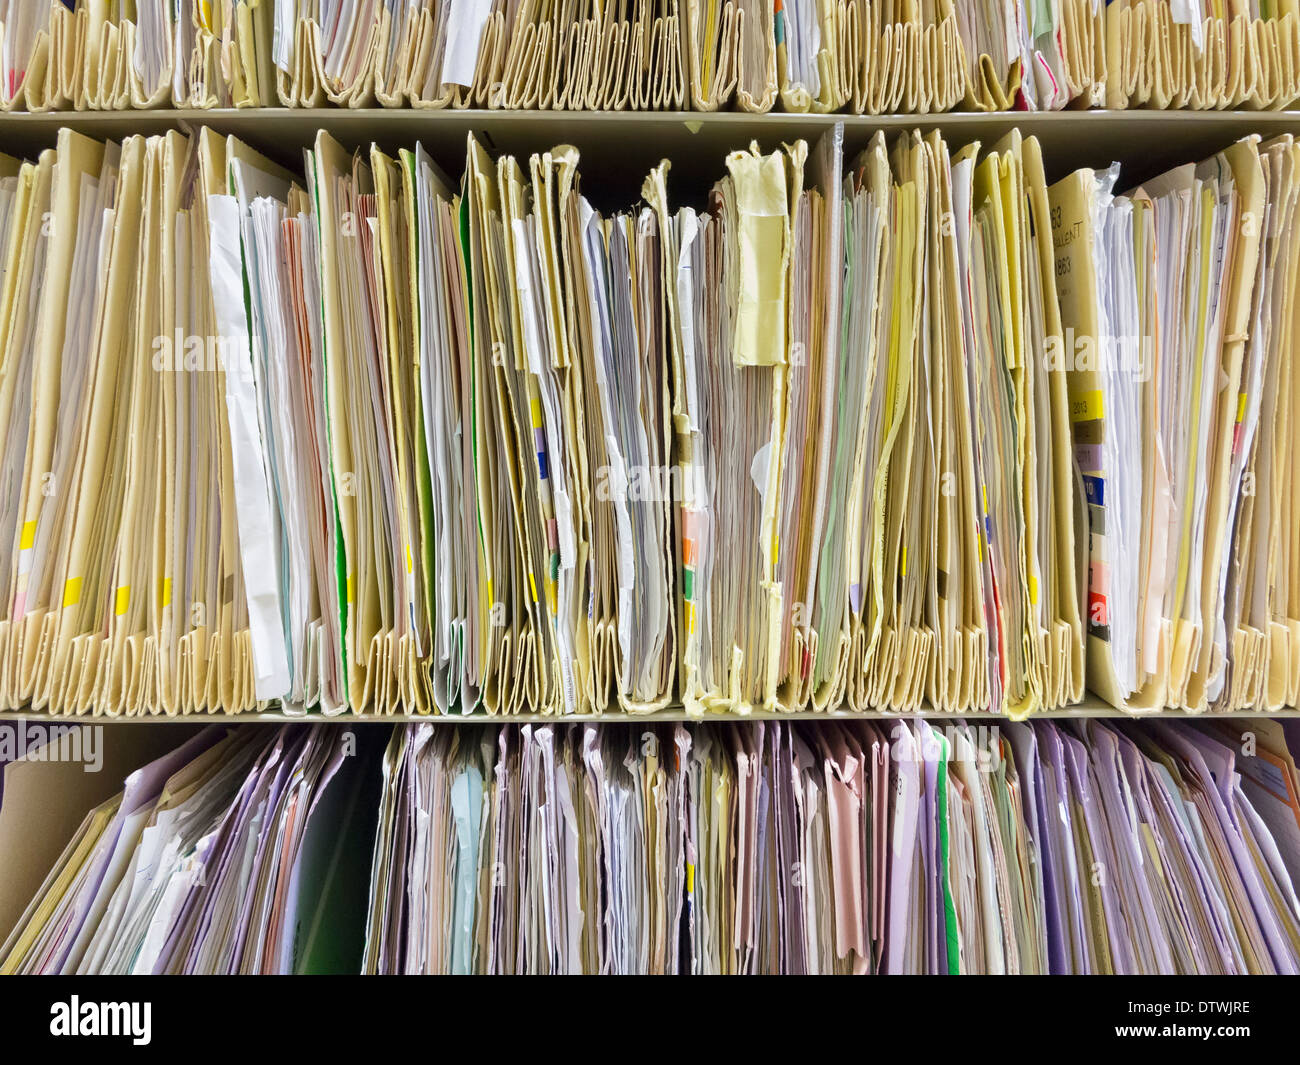 Paper files at a UK hospital Stock Photo